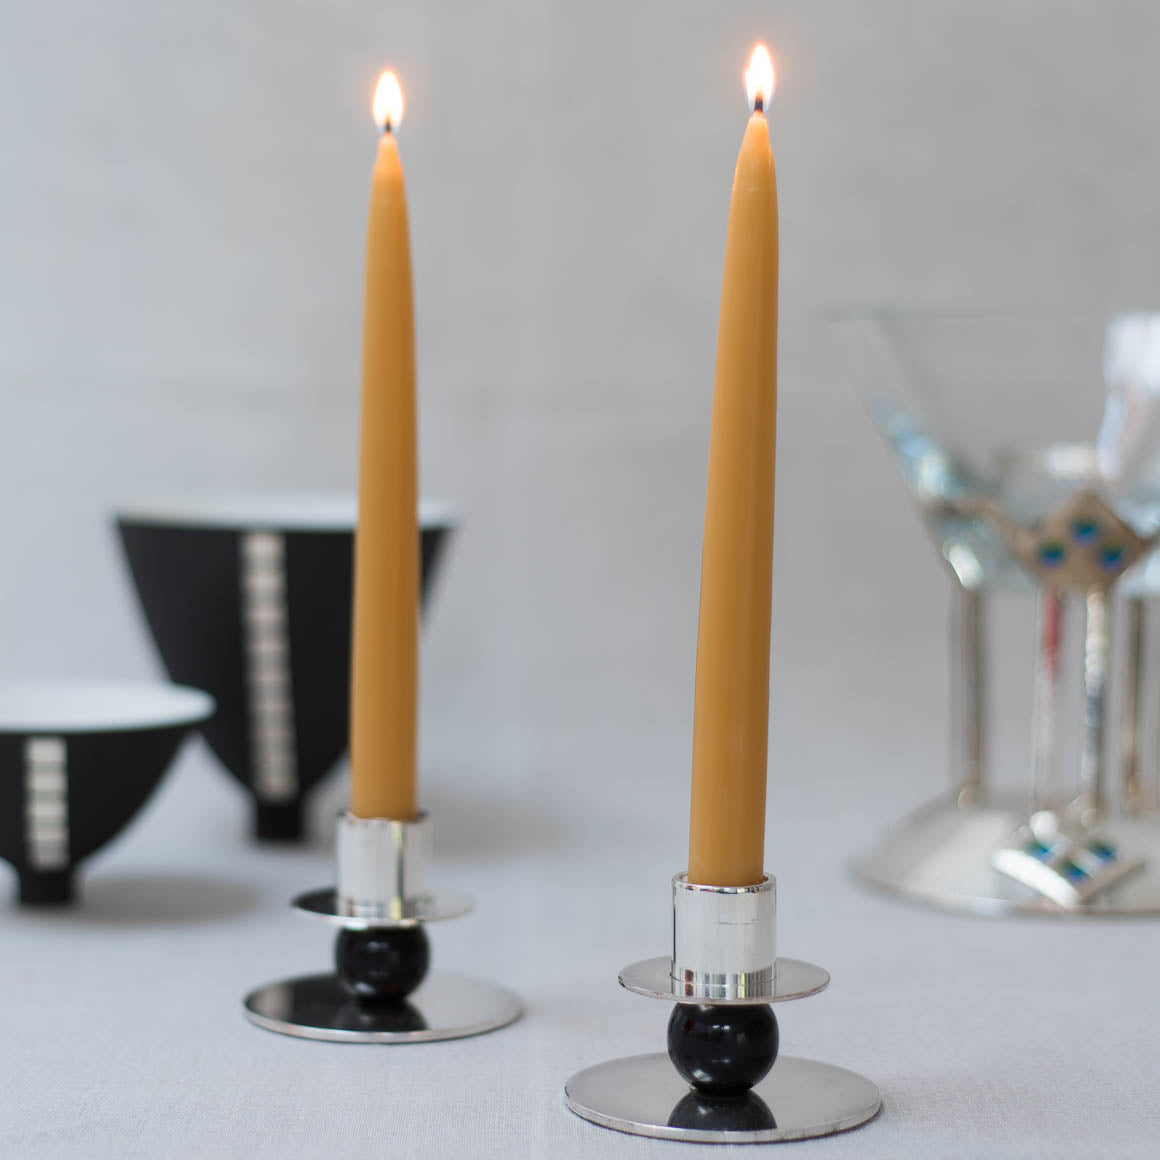 beeswax dinner candle pair dipped